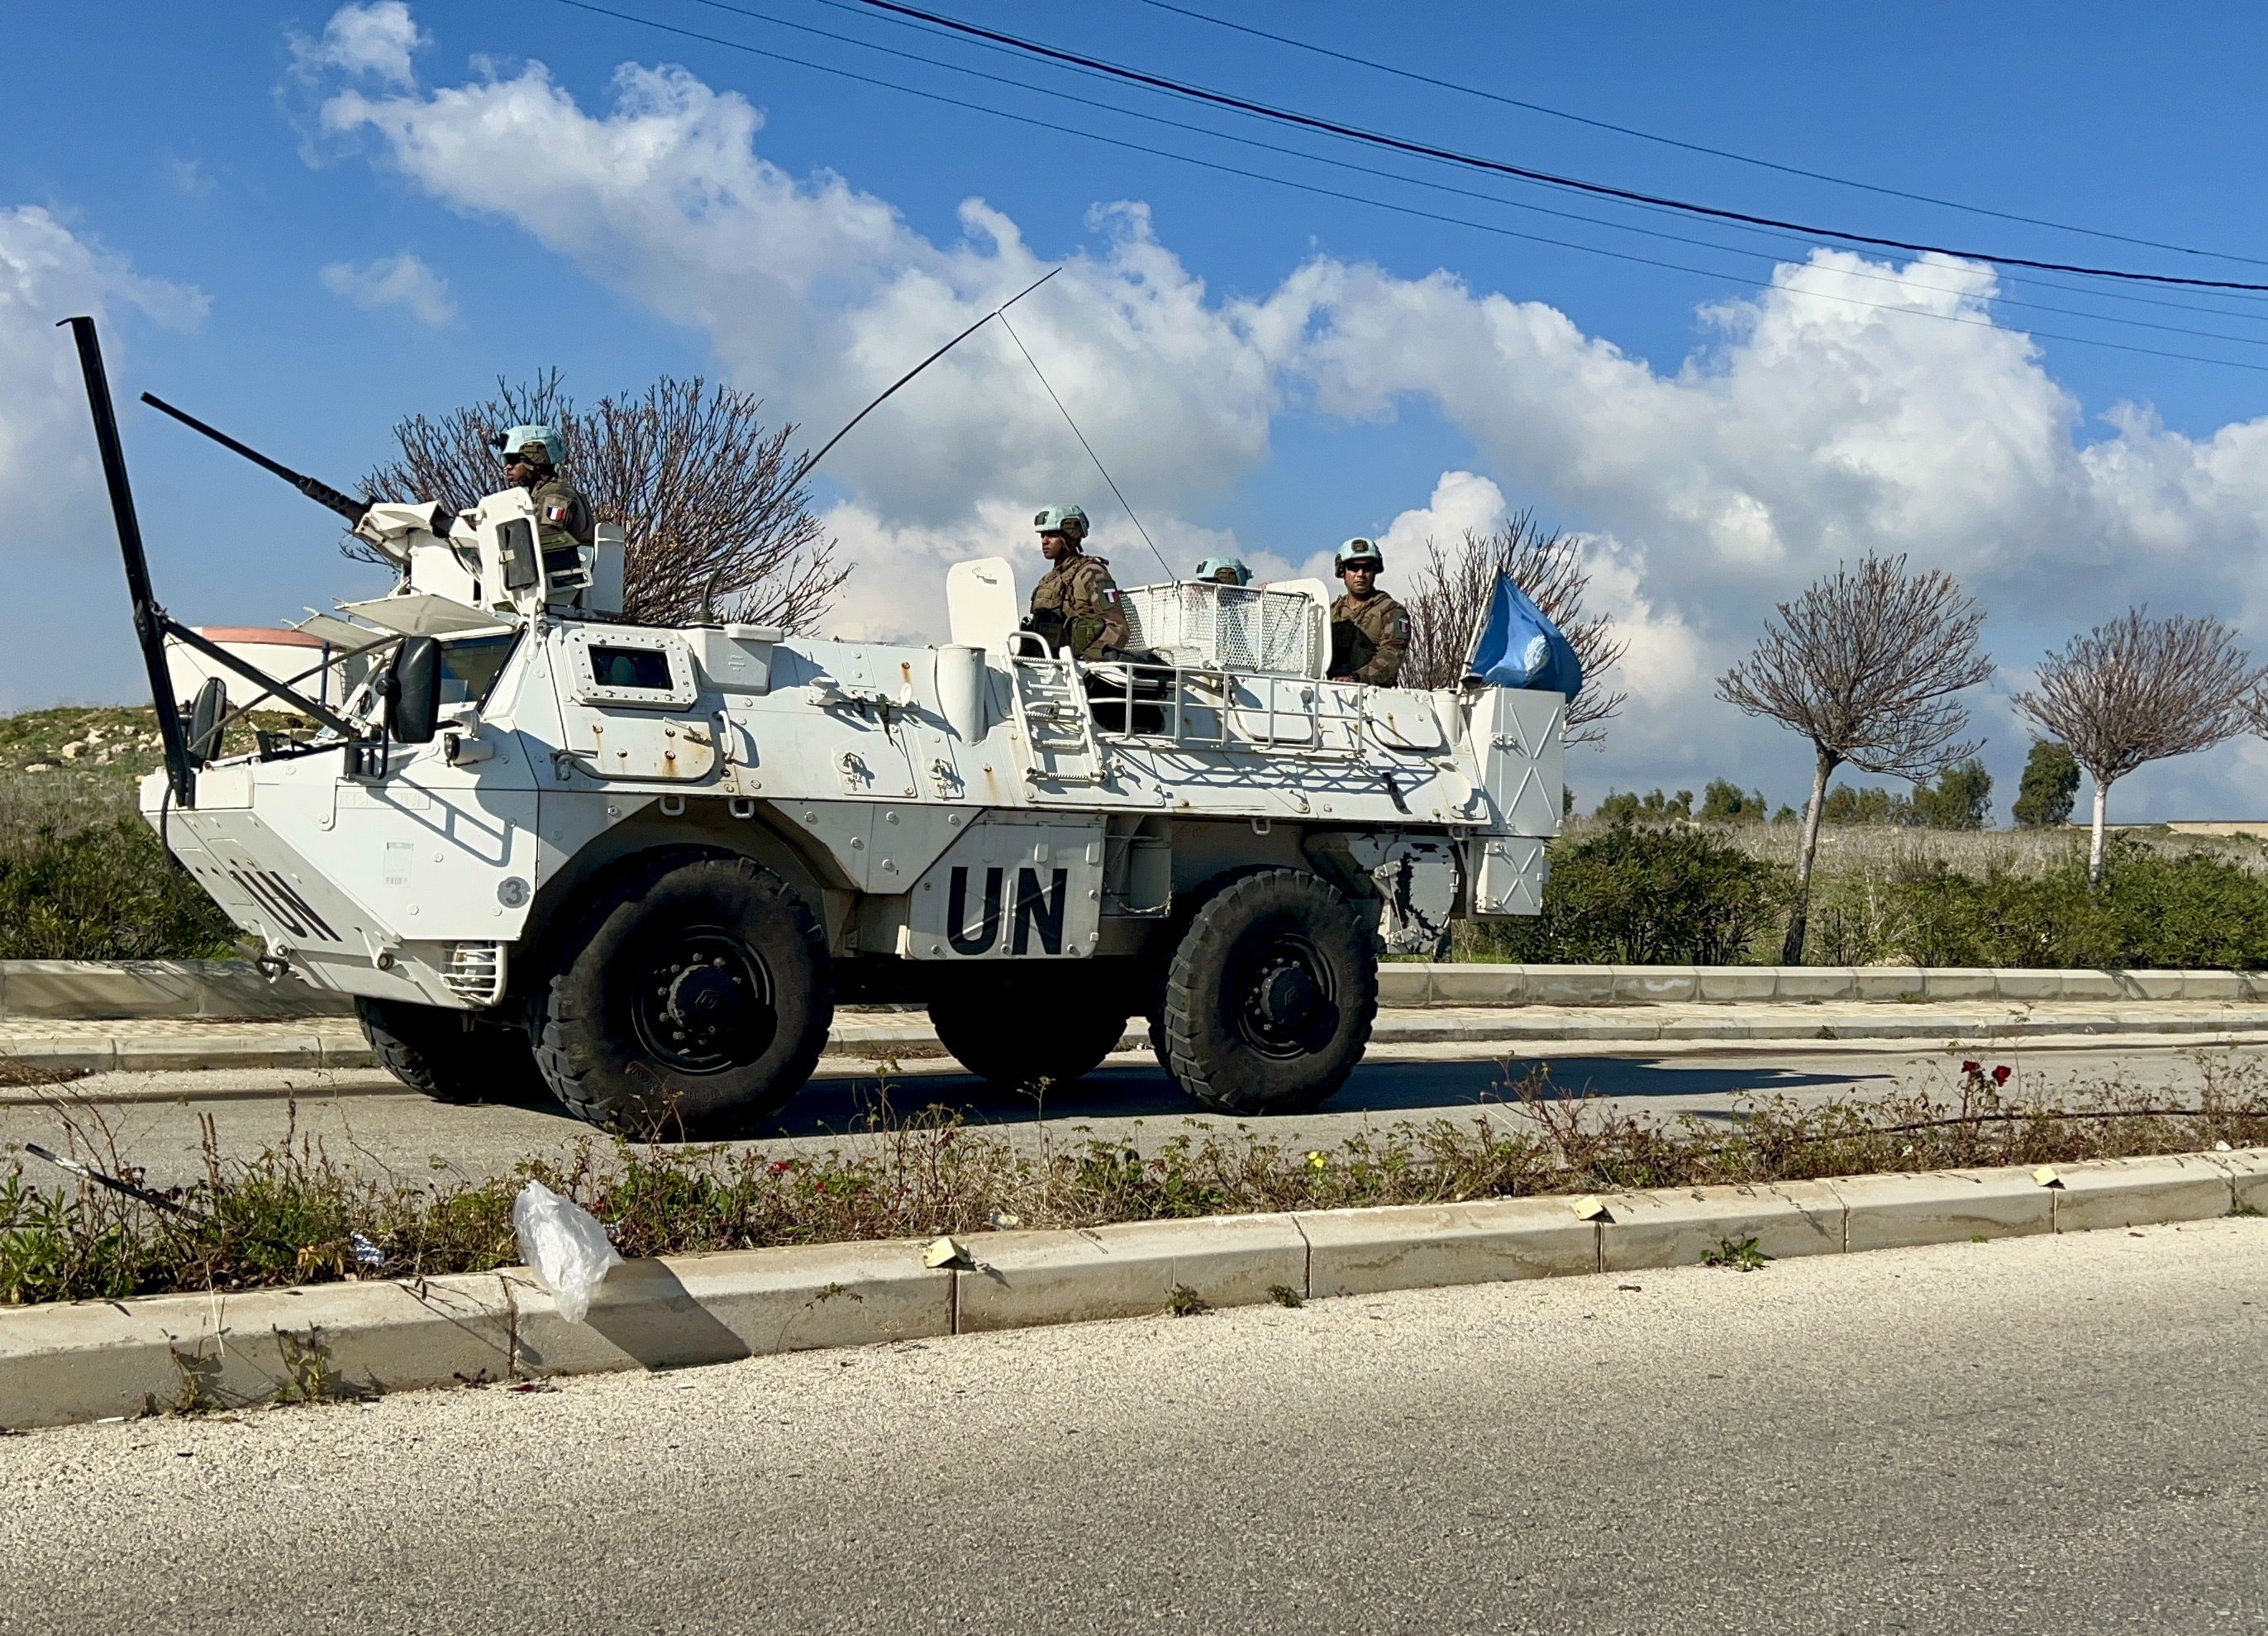 An armoured vehicle of the United Nations Interim Forces in Lebanon (UNIFIL) patrols in Khiyam plain, near the border with Israel, in Lebanon on Friday. Photo: EPA-EFE